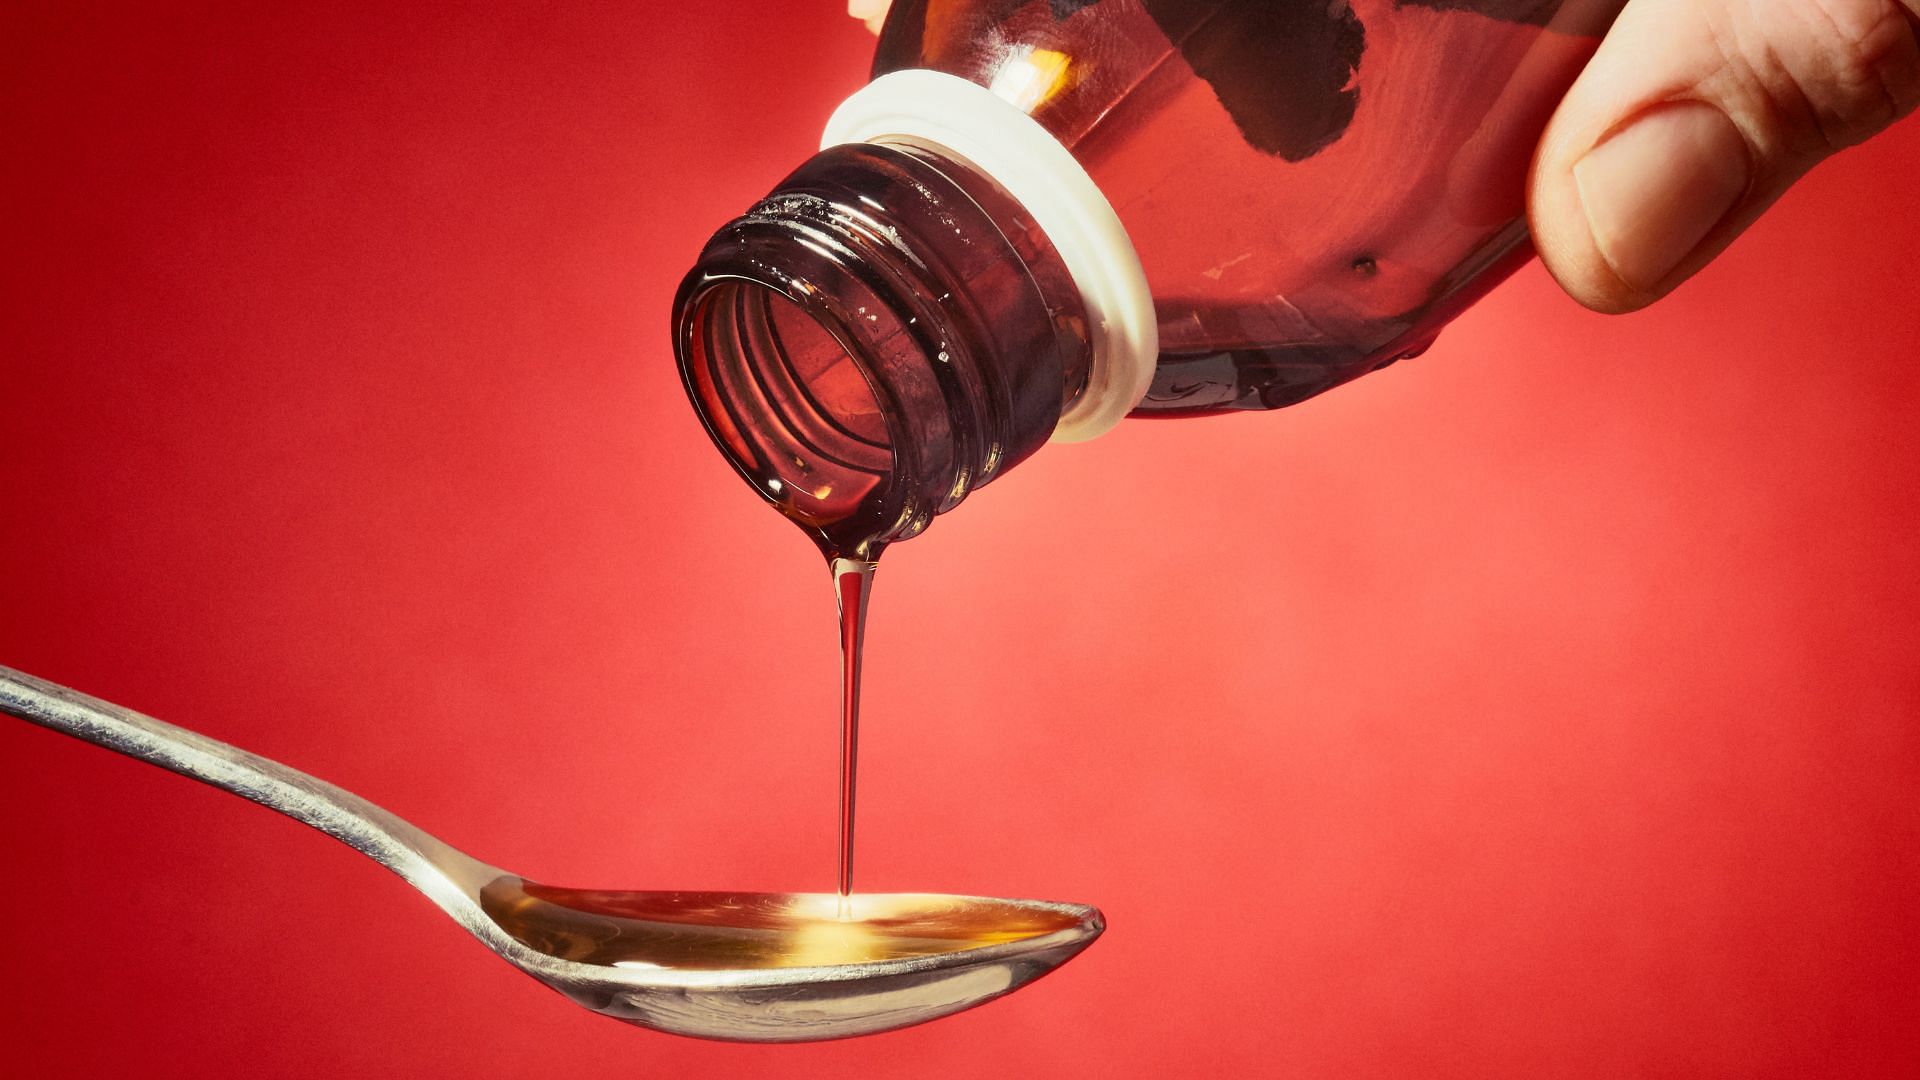 <div class="paragraphs"><p>5 batches of cough syrups manufactured by Haryana-based pharmaceutical company, maiden pharmacy, declared 'not of standard' byCDSCO. (Image representational only)</p></div>